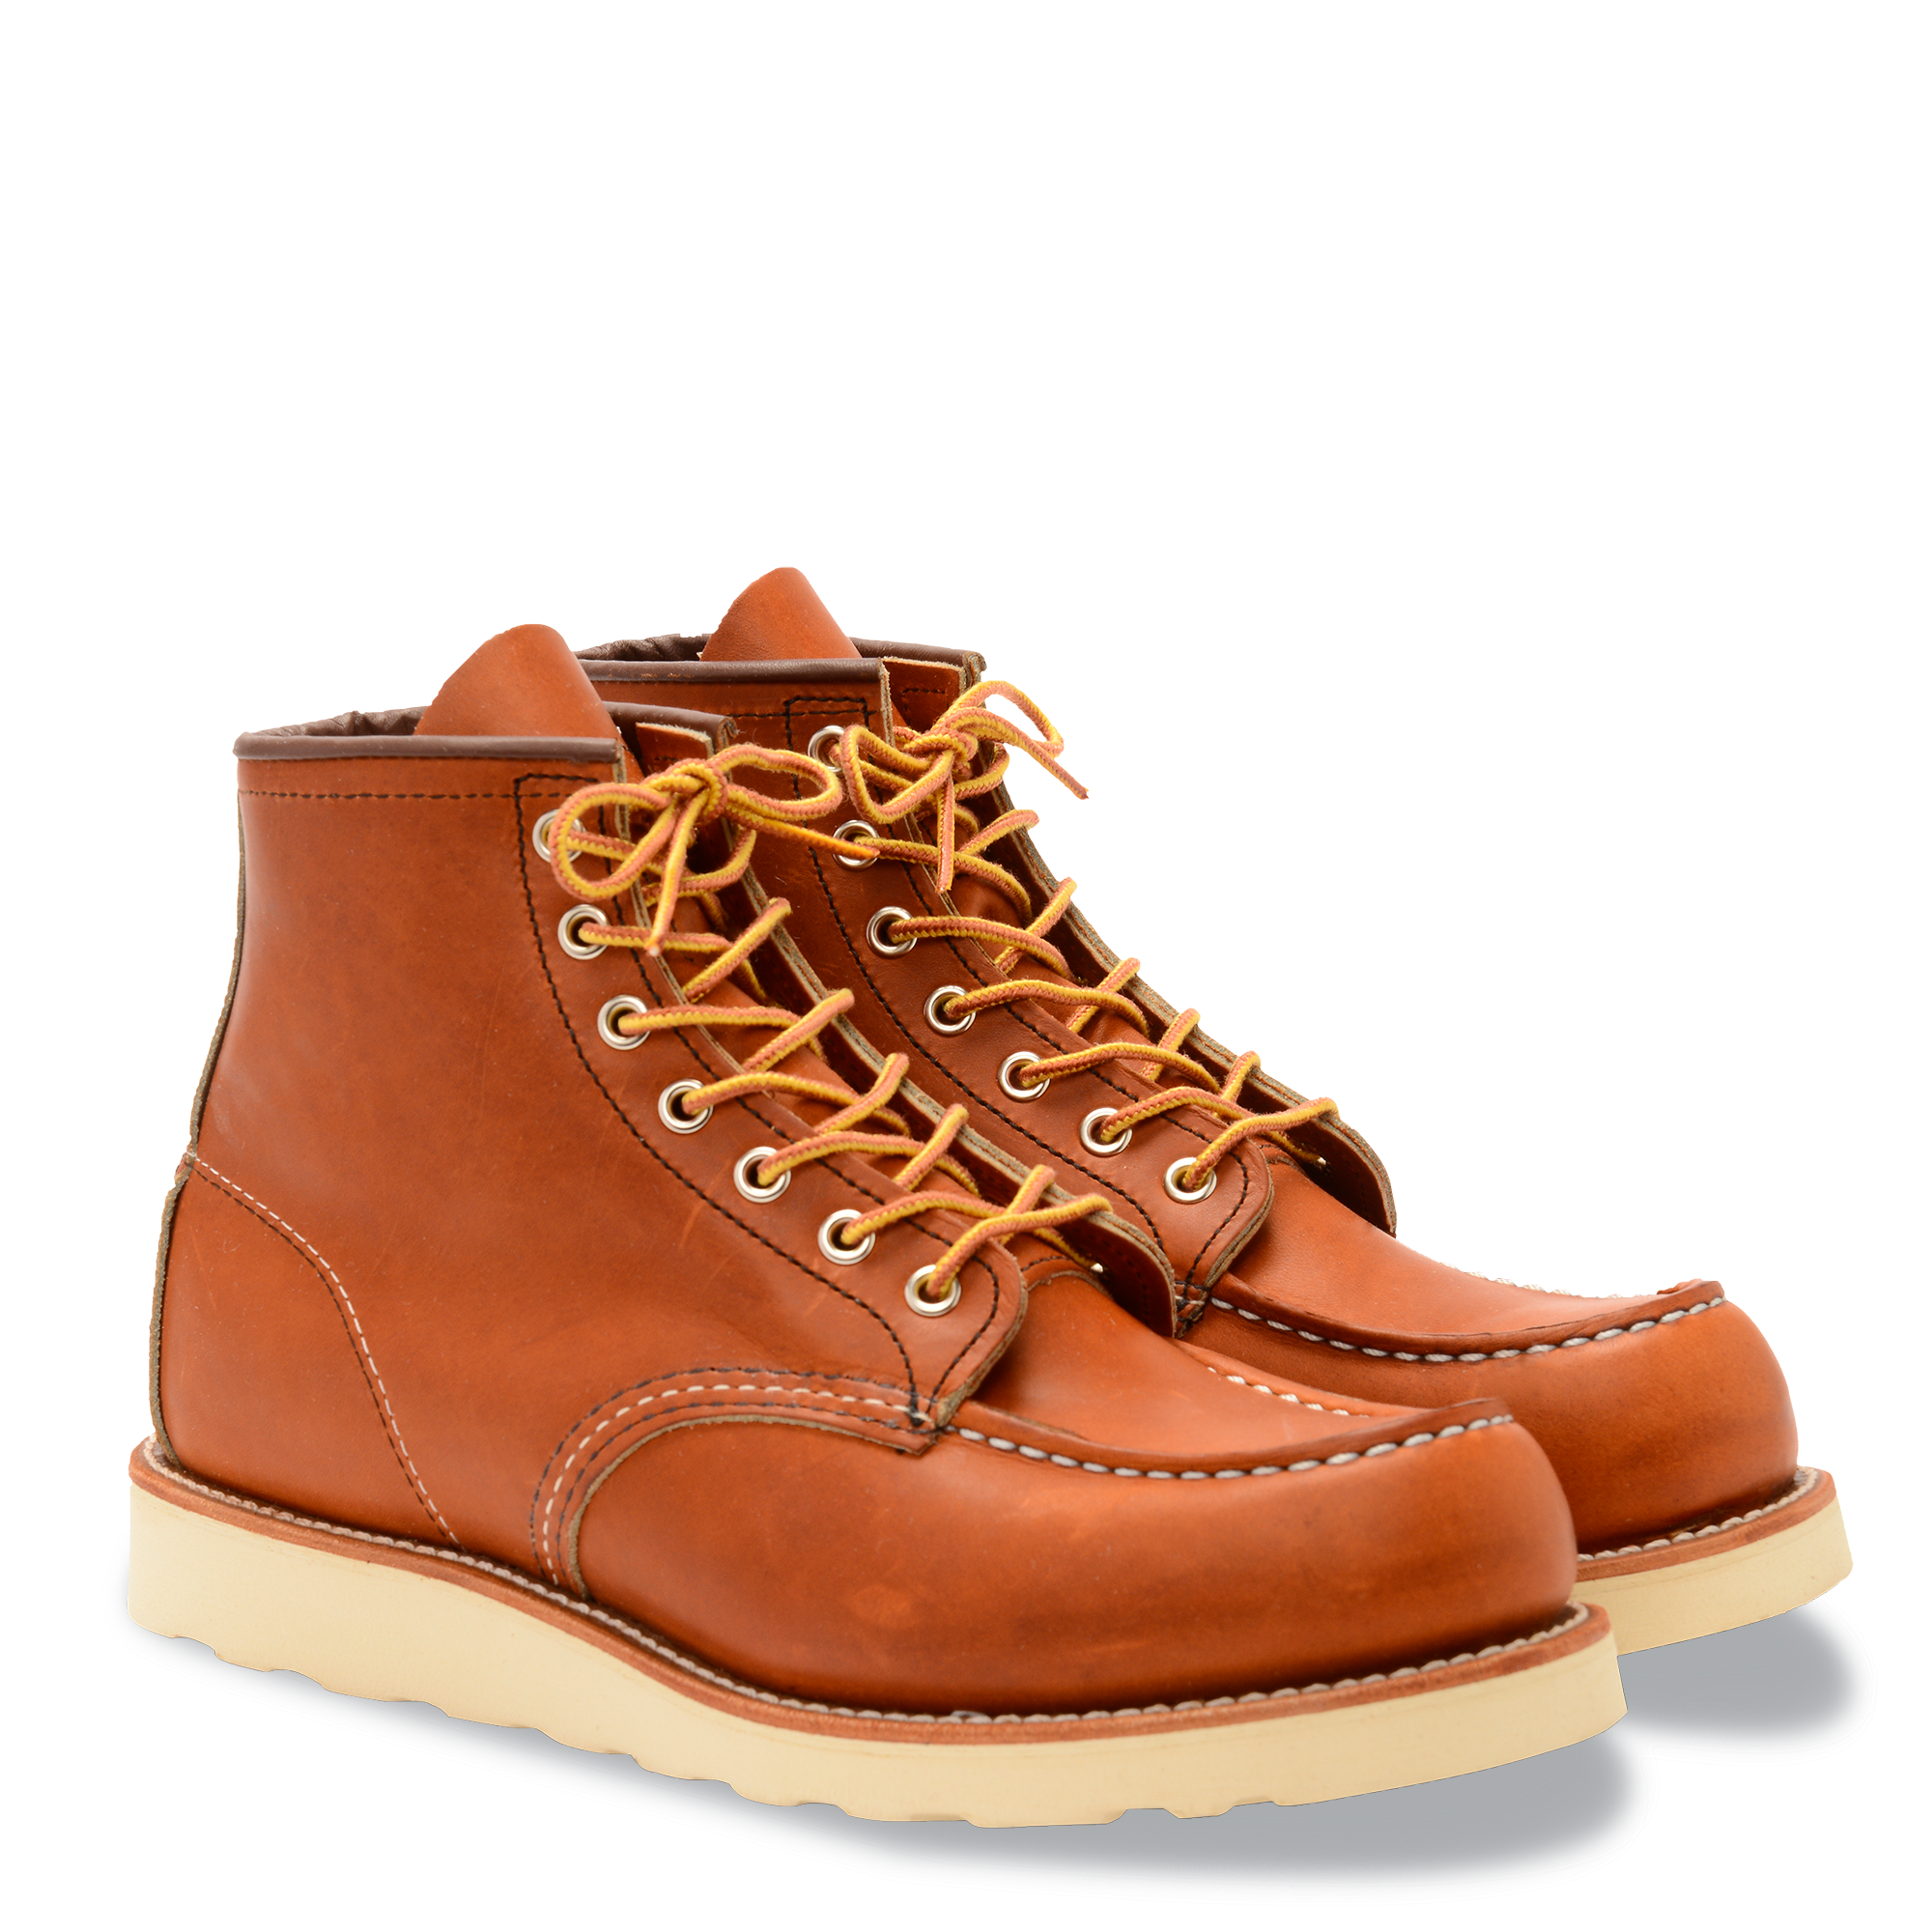 Marty Fielding efterår nyhed Red Wing Classic Moc Toe Boots 875 | Red Wing London London